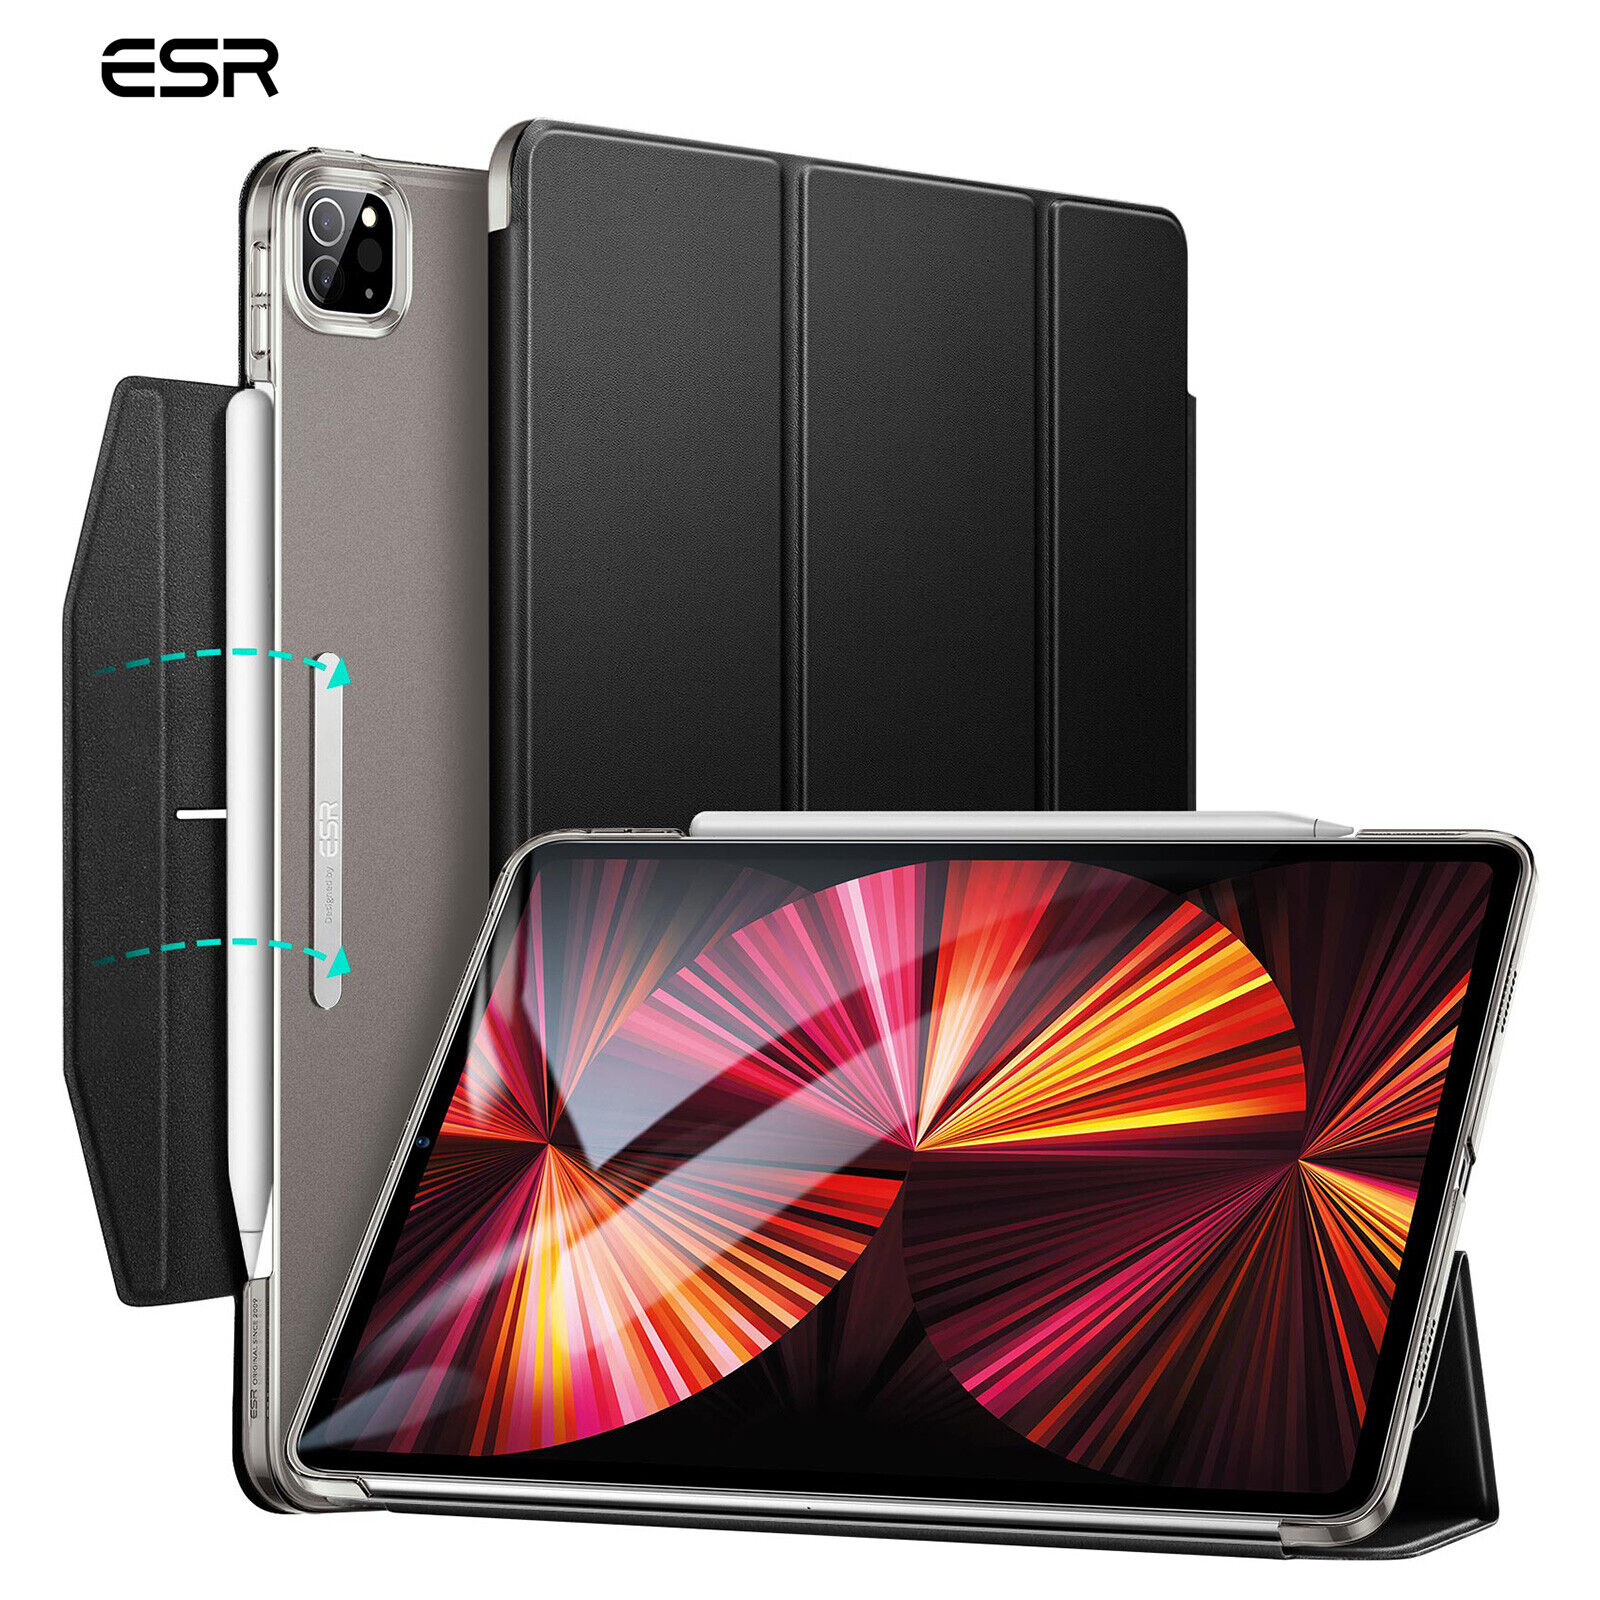 ESR Smart Case for iPad Pro 11 inch 2021, Yippee Trifold Magnetic Stand Cover